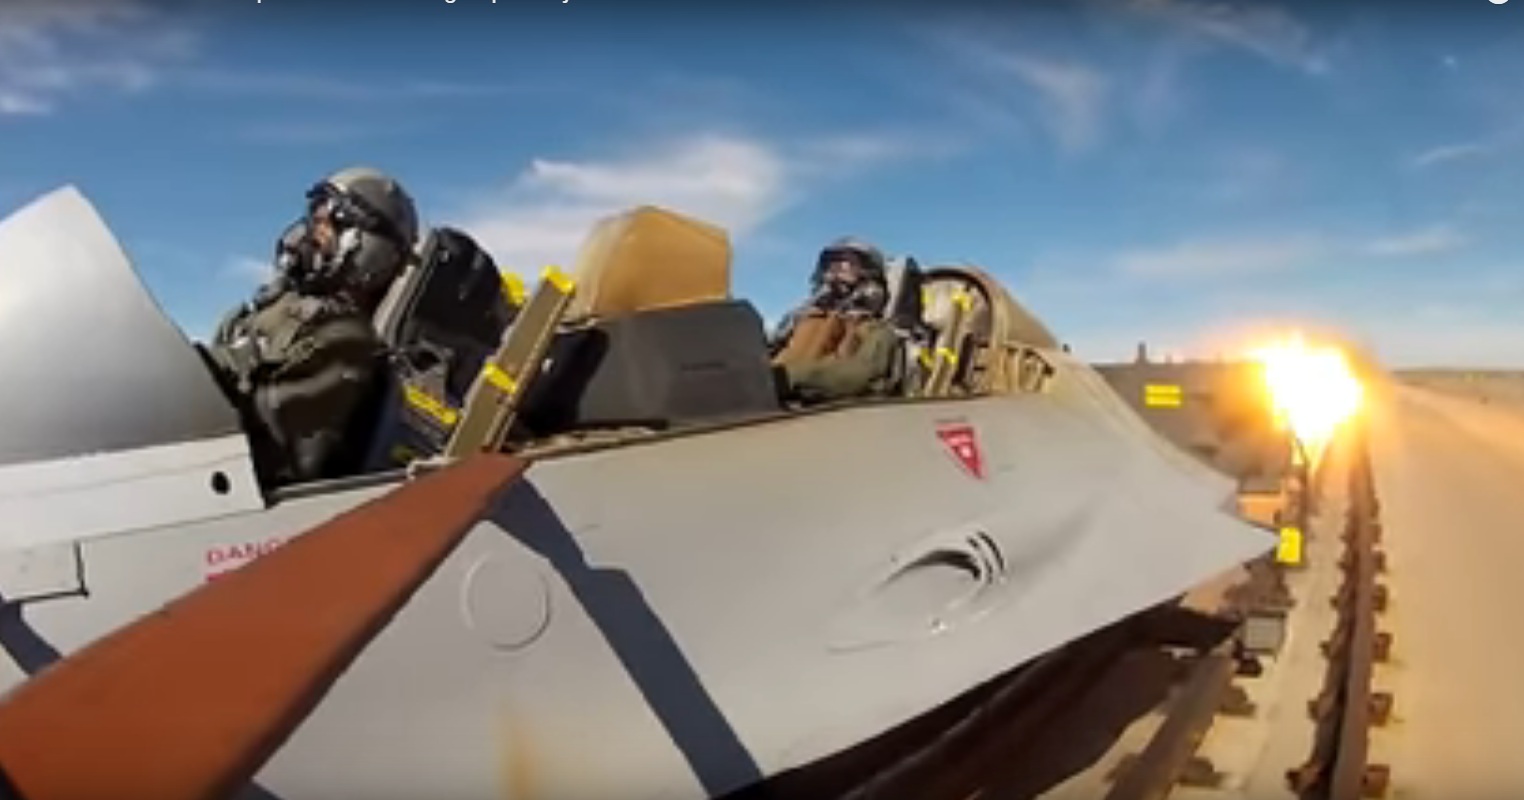 There Goes The Mannequin! Awesome High Speed Ejection Seat Tests